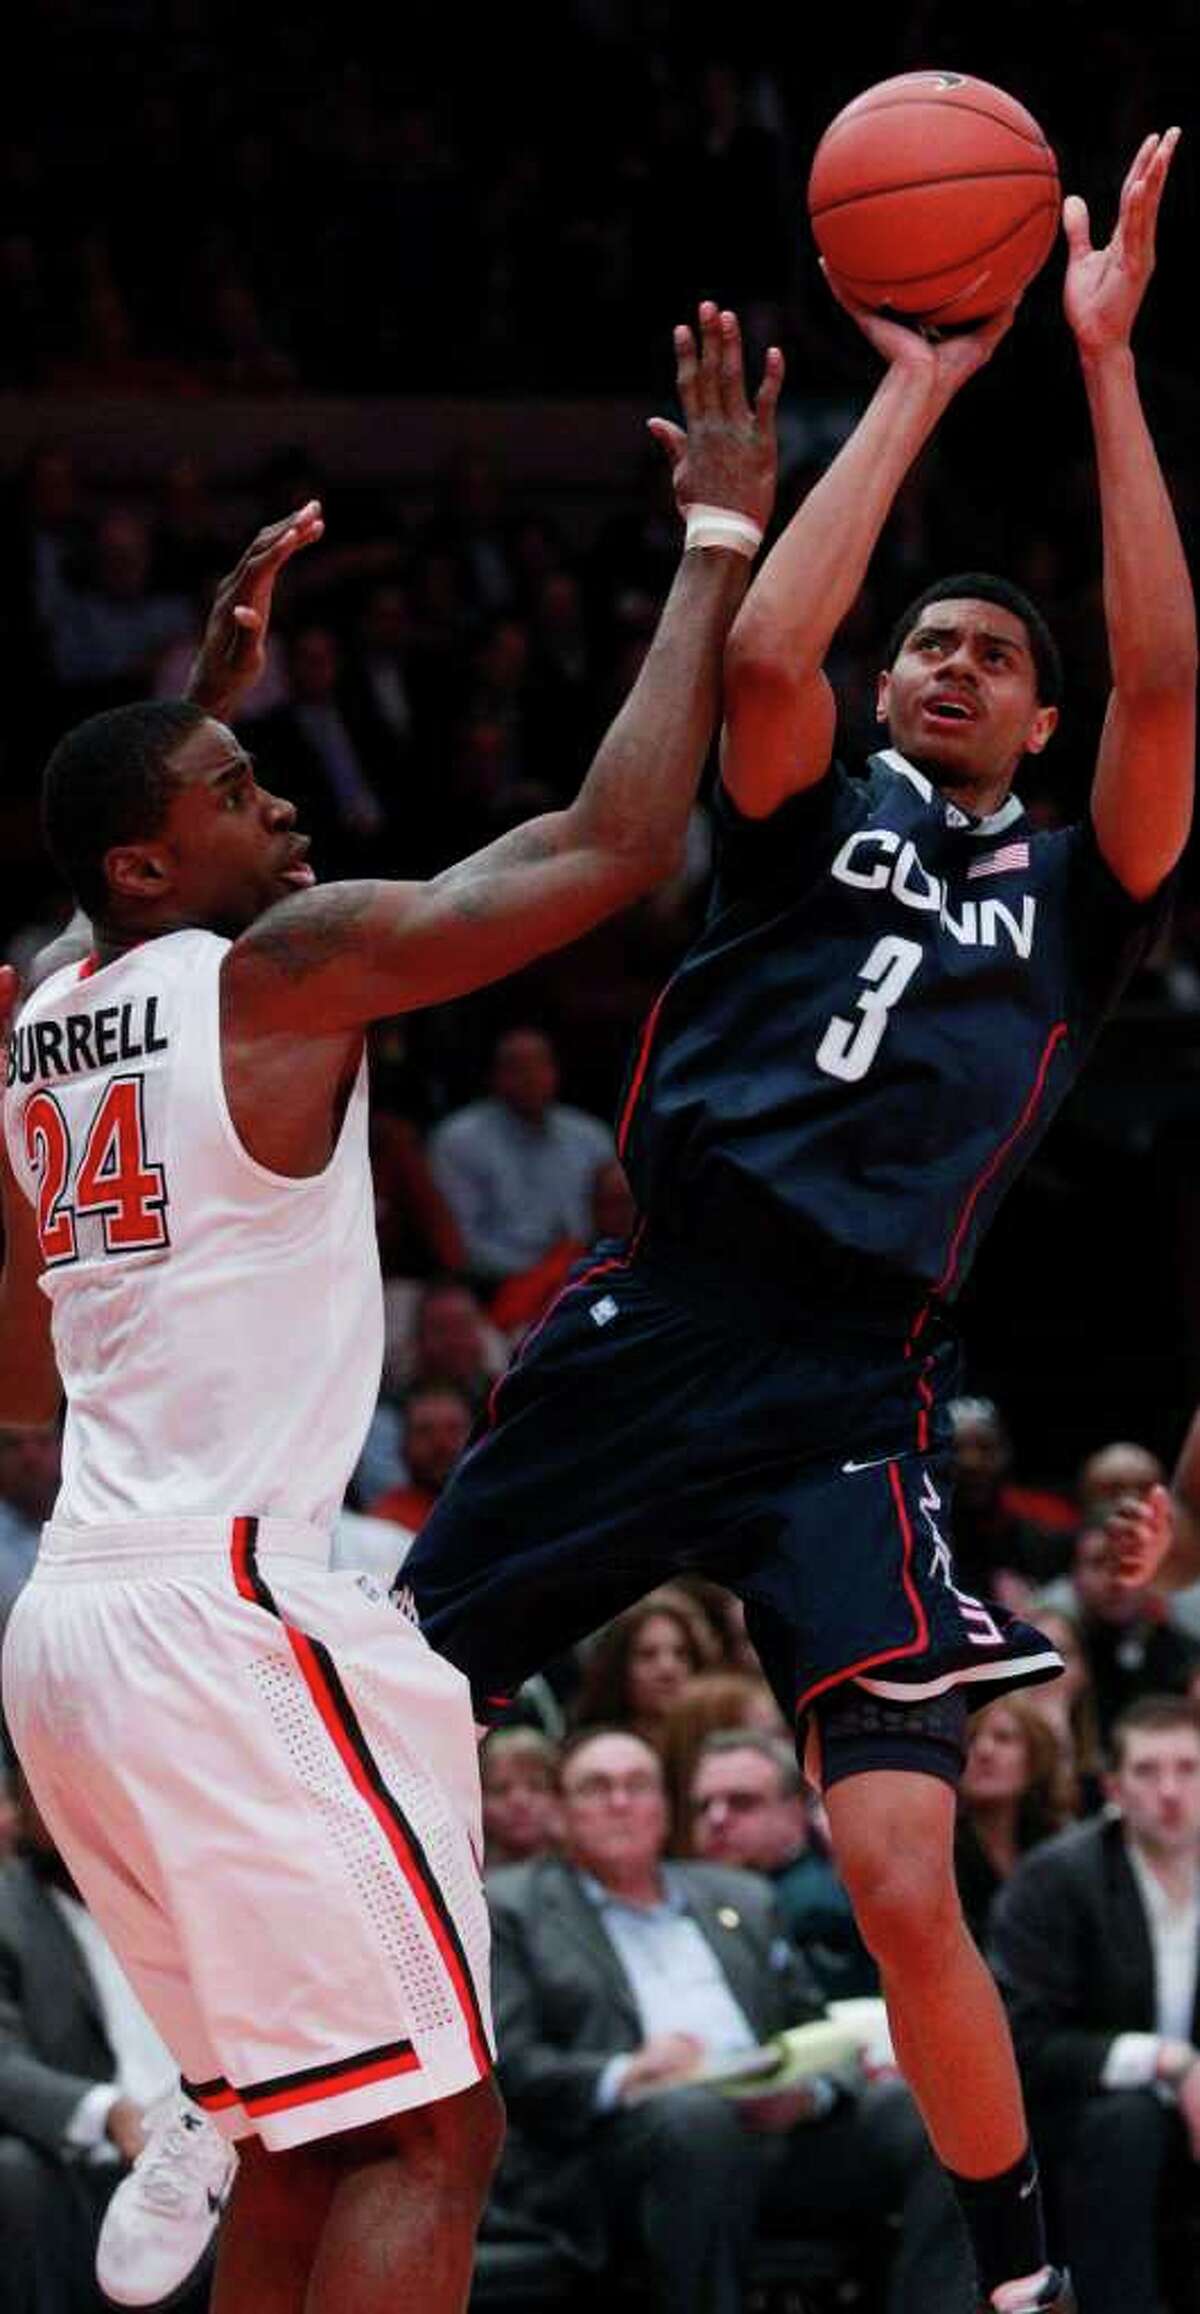 Connecticut's Jeremy Lamb (3) shoots over St. John's Justin Burrell (24) in the first half of an NCAA college basketball game on Thursday, Feb. 10, 2011, in New York. (AP Photo/Frank Franklin II)